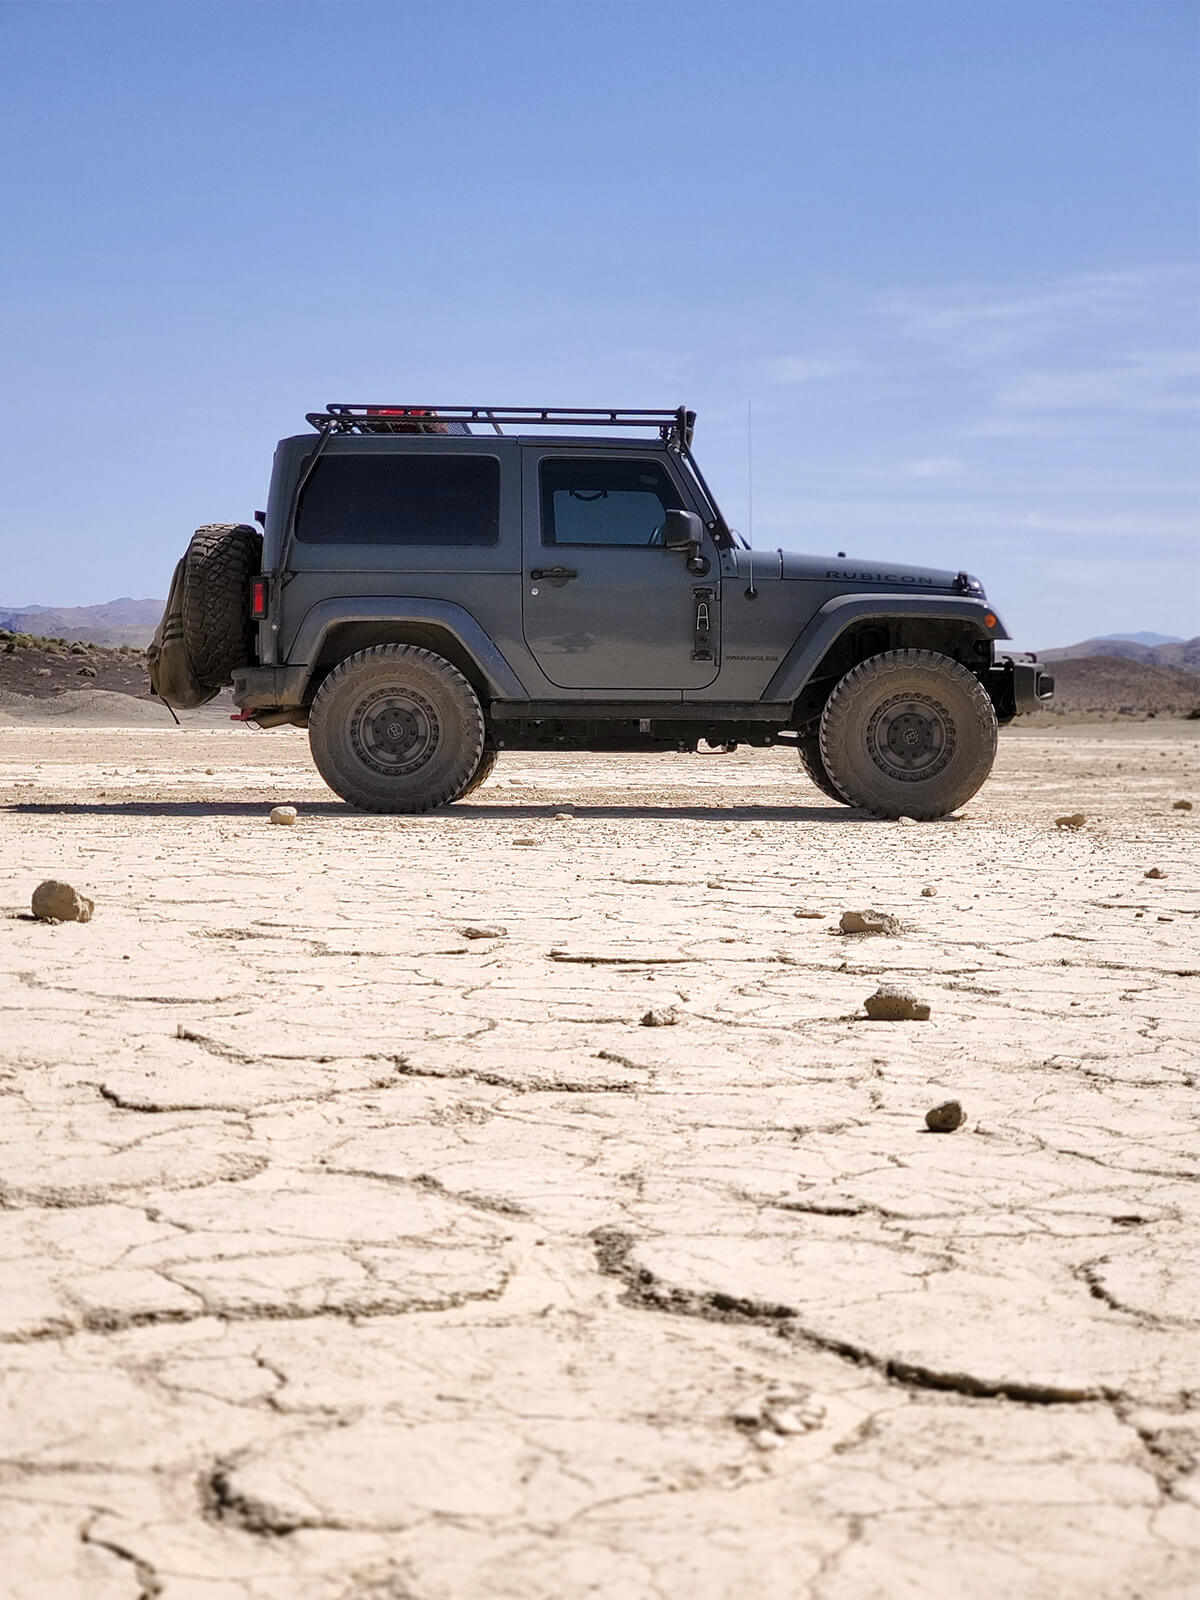 Lifted Jeep wrangler with offroad mods in Baja desert